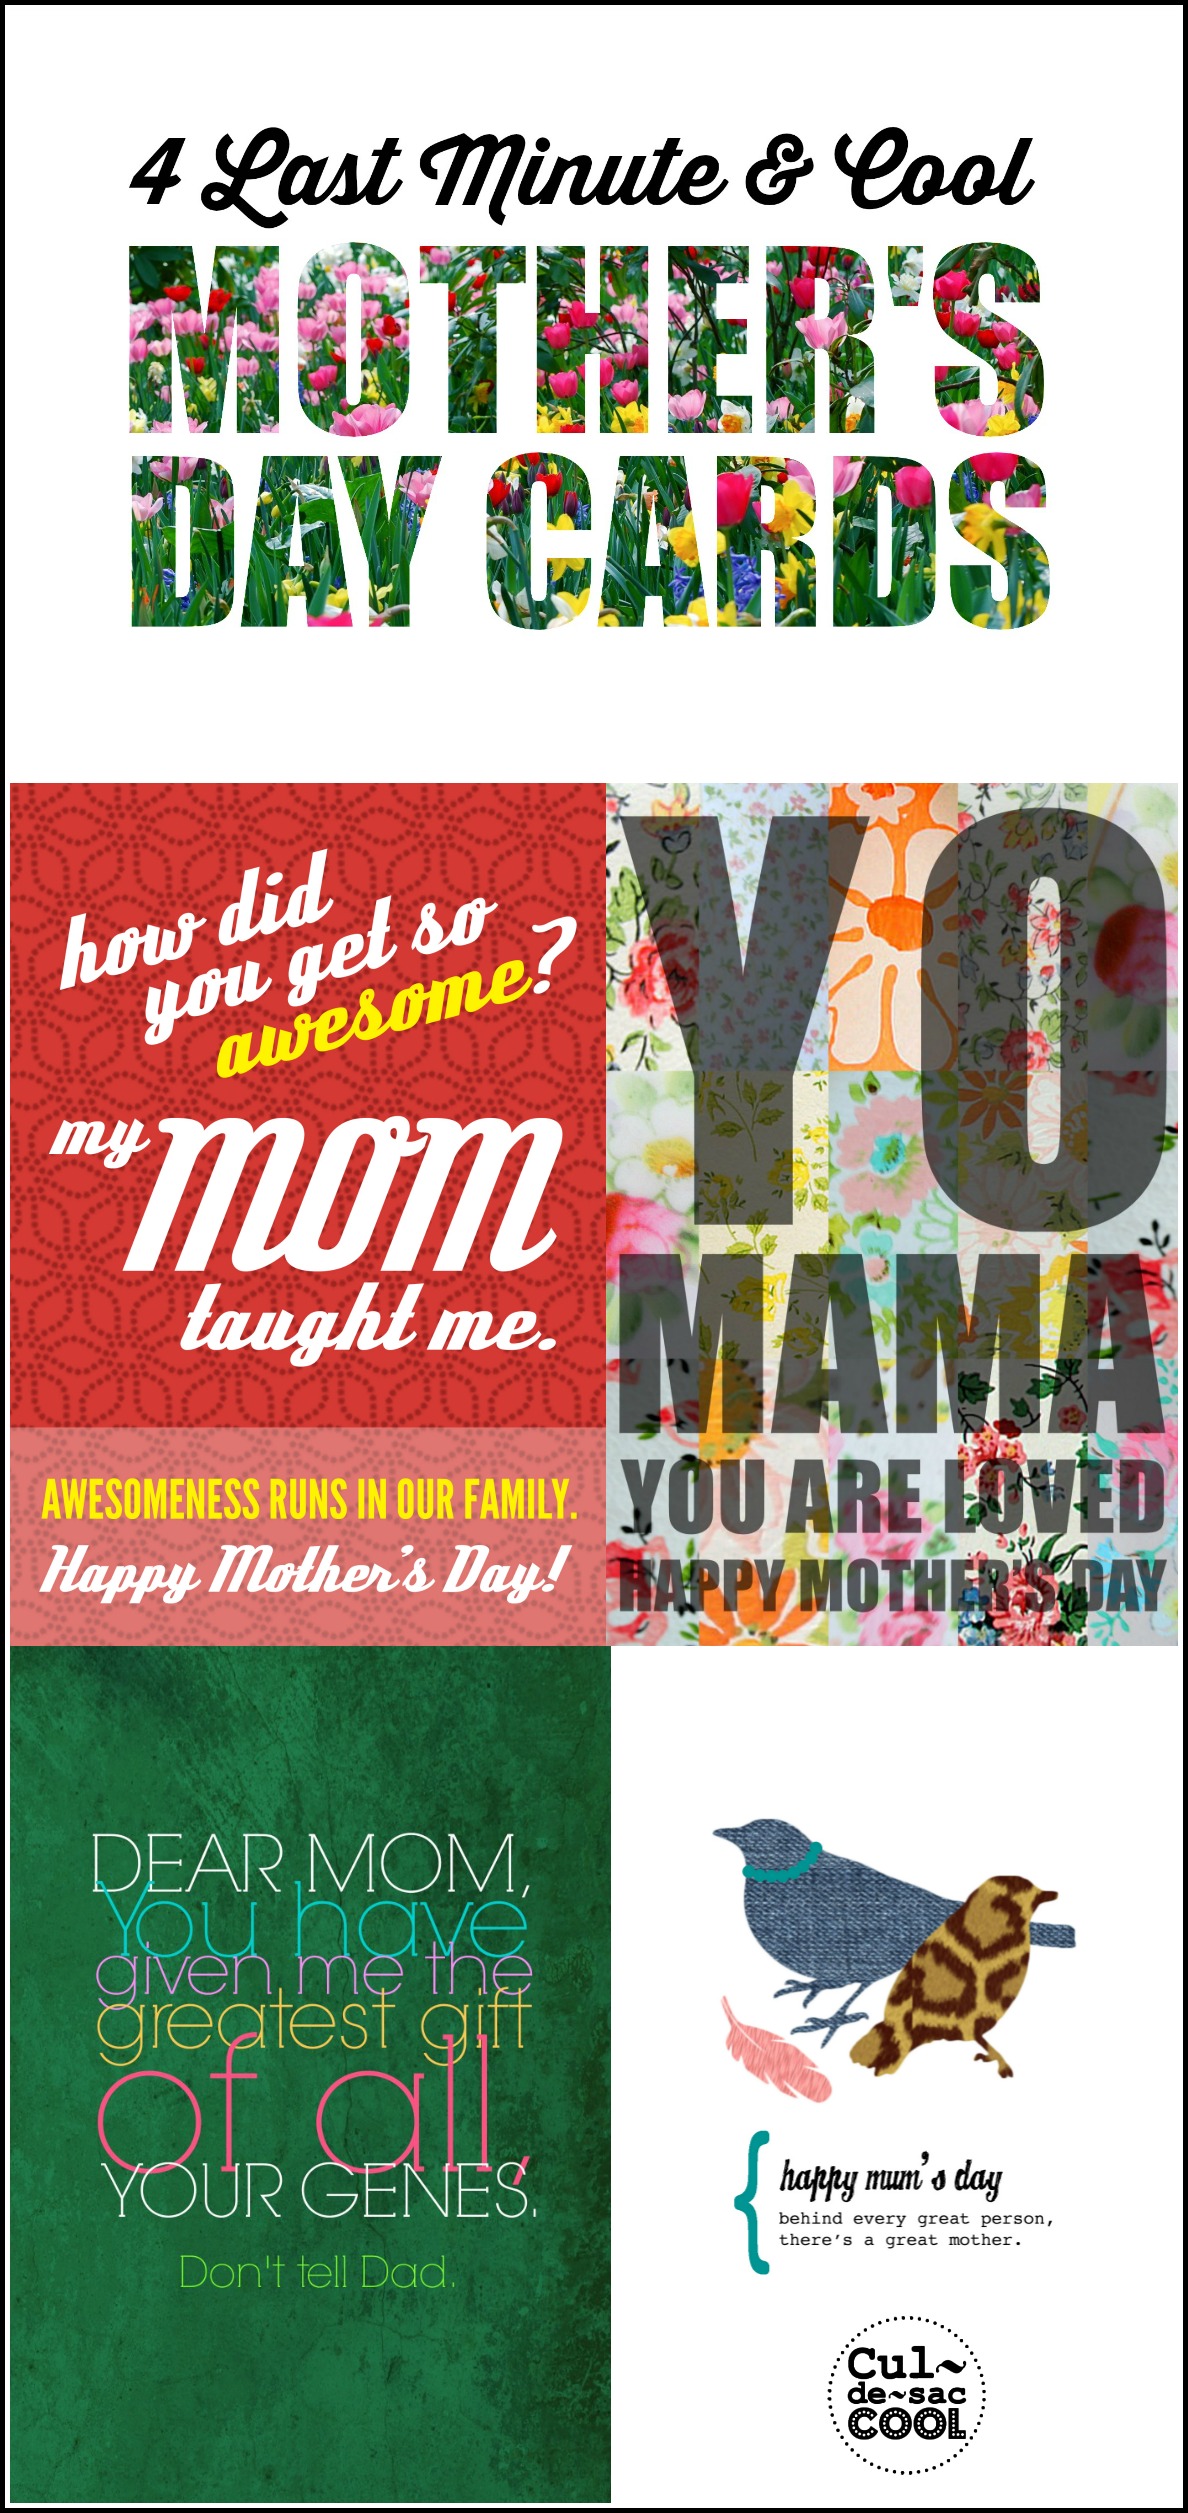 4 Last Minute & Cool Mother's Day Cards Collage